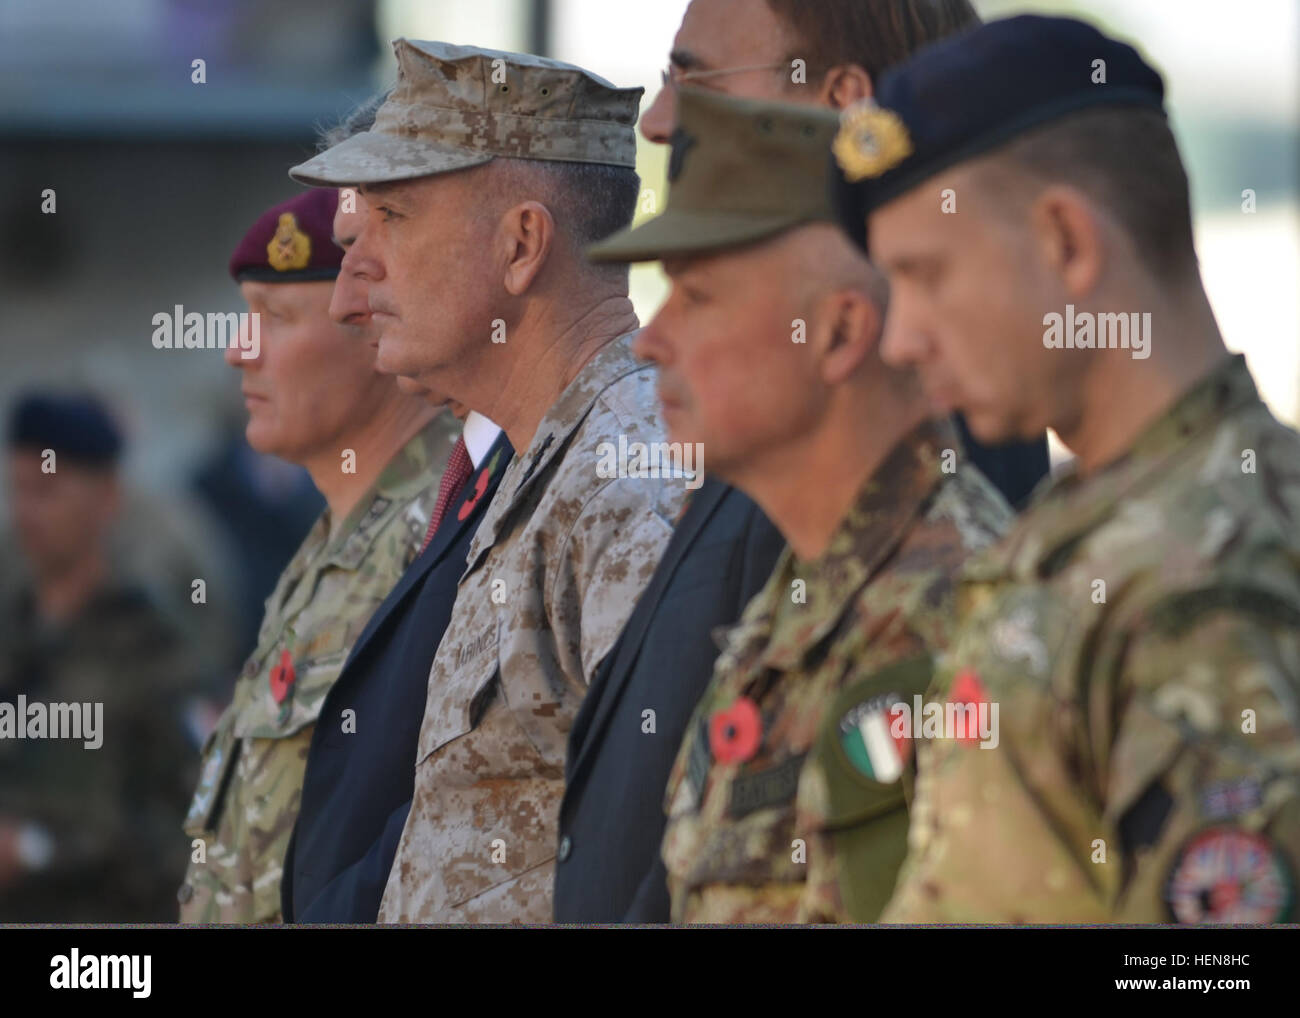 U.S. Marine Corps Gen. Joseph F. Dunford Jr., third from left, commander of International Security Assistance Force and U.S. Forces - Afghanistan, stands next to several senior military and civilian officials as they listen to the invocation during a Remembrance Day ceremony held at ISAF Headquarters in Kabul, Afghanistan, Nov. 11, 2013. The outdoor ceremony consisted of a few readings from the chaplain, a lying of wreaths on the ISAF-Afghan National Security Force monument, and two minutes of silence. Remembrance Day is a memorial day observed in many countries since the end of World War I to Stock Photo